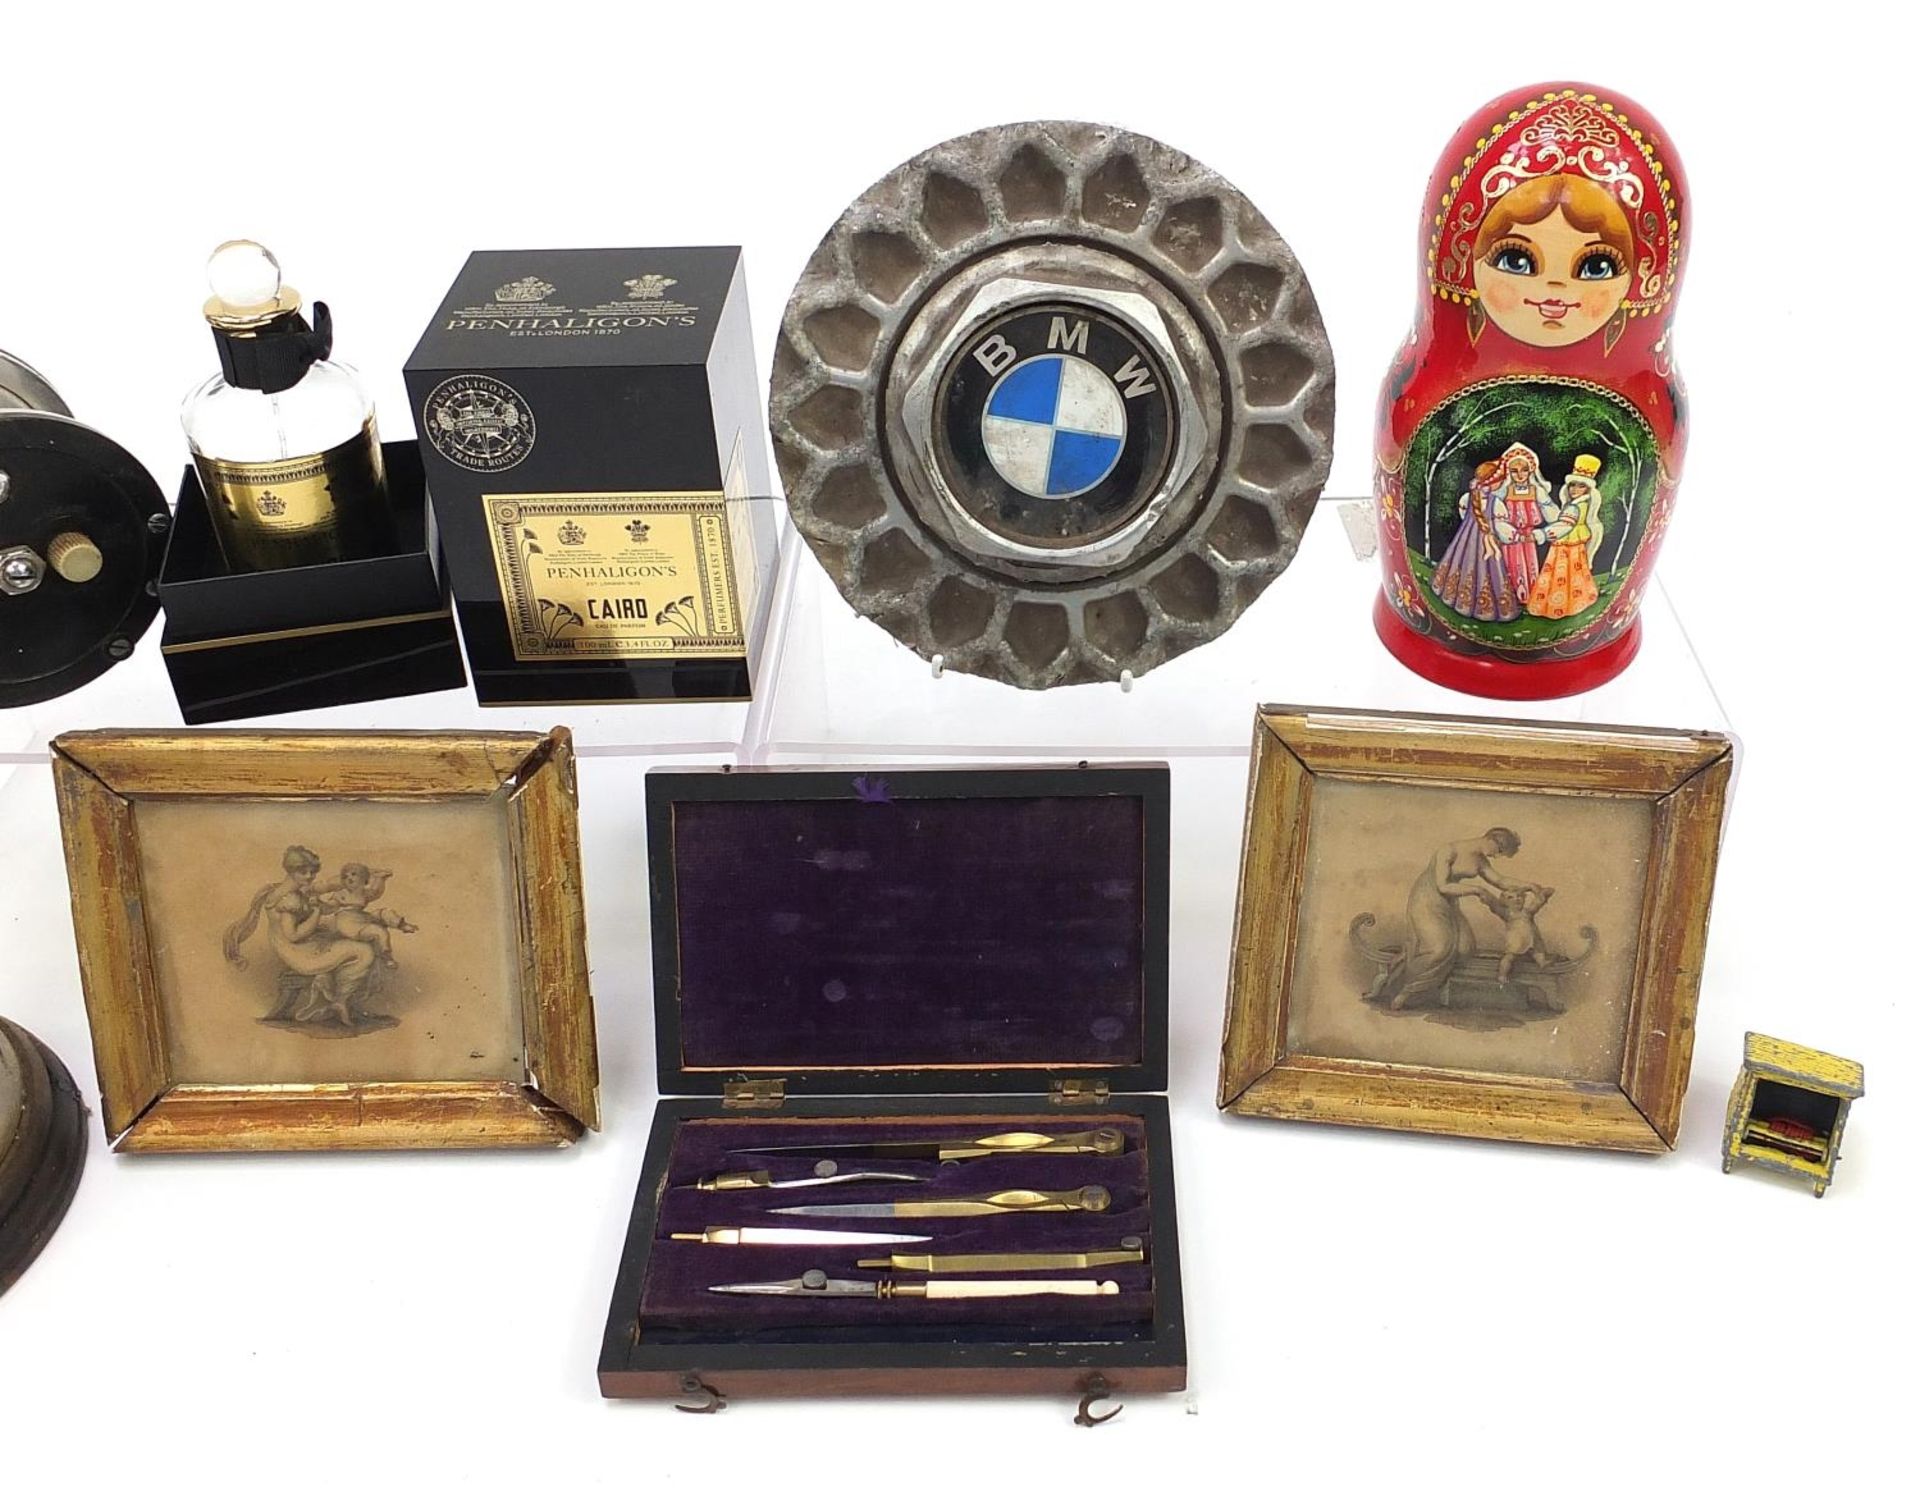 Sundry items including set of Russian stacking dolls, vintage fishing reel and BMW vehicle hub cap - Image 3 of 3